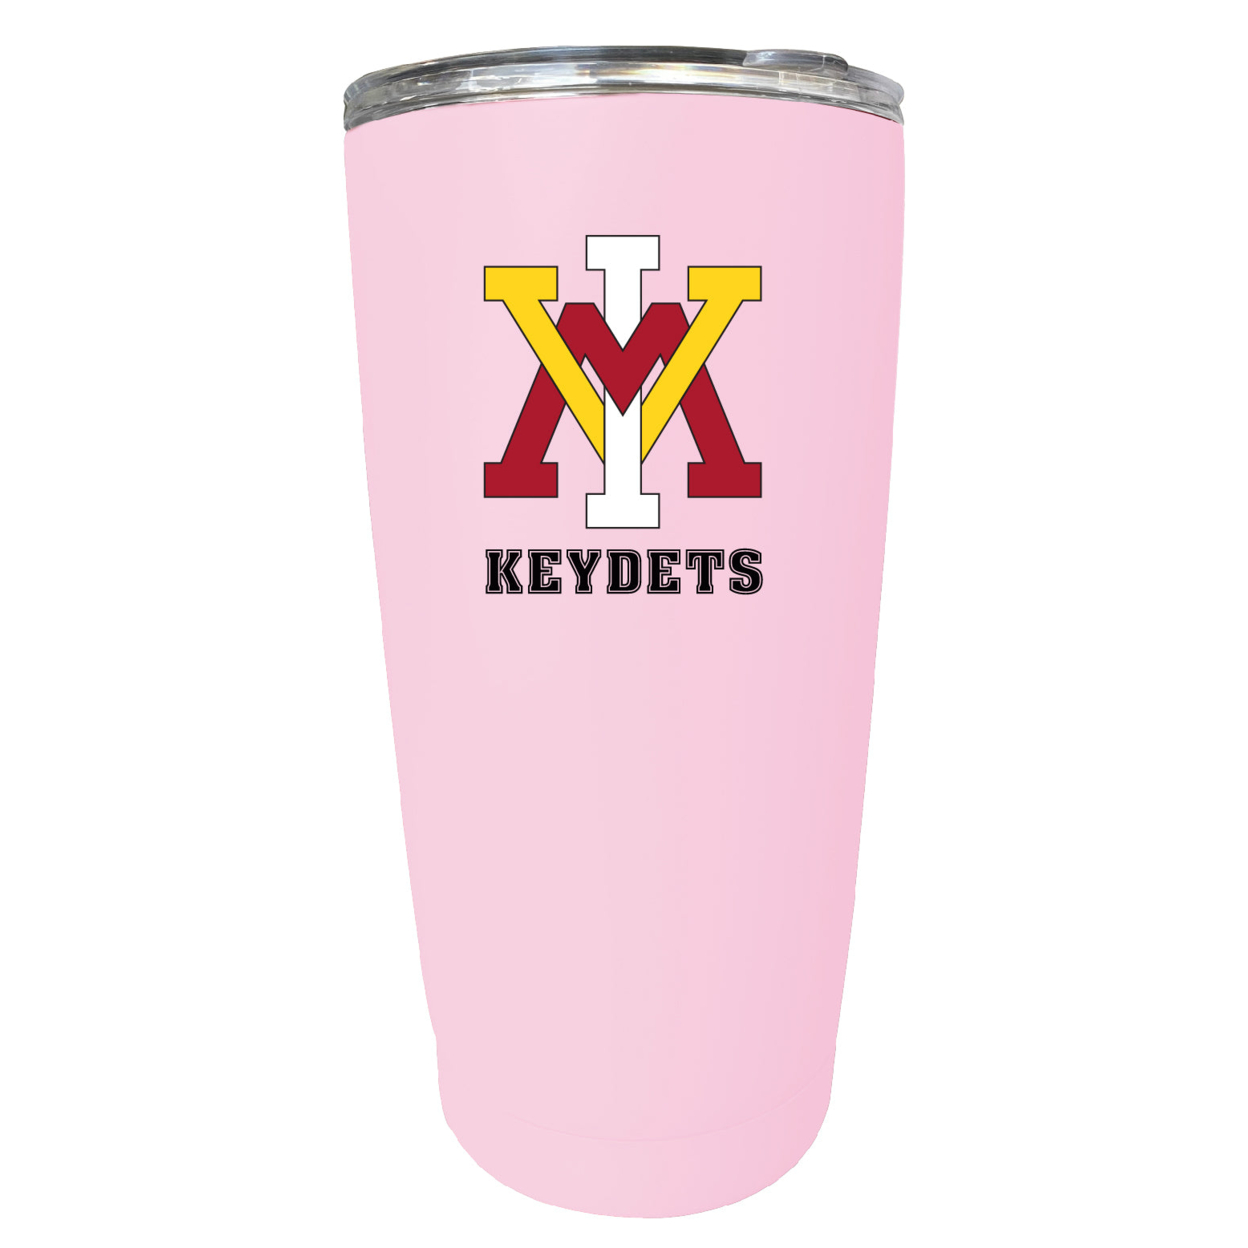 VMI Keydets 16 Oz Stainless Steel Insulated Tumbler - Yellow